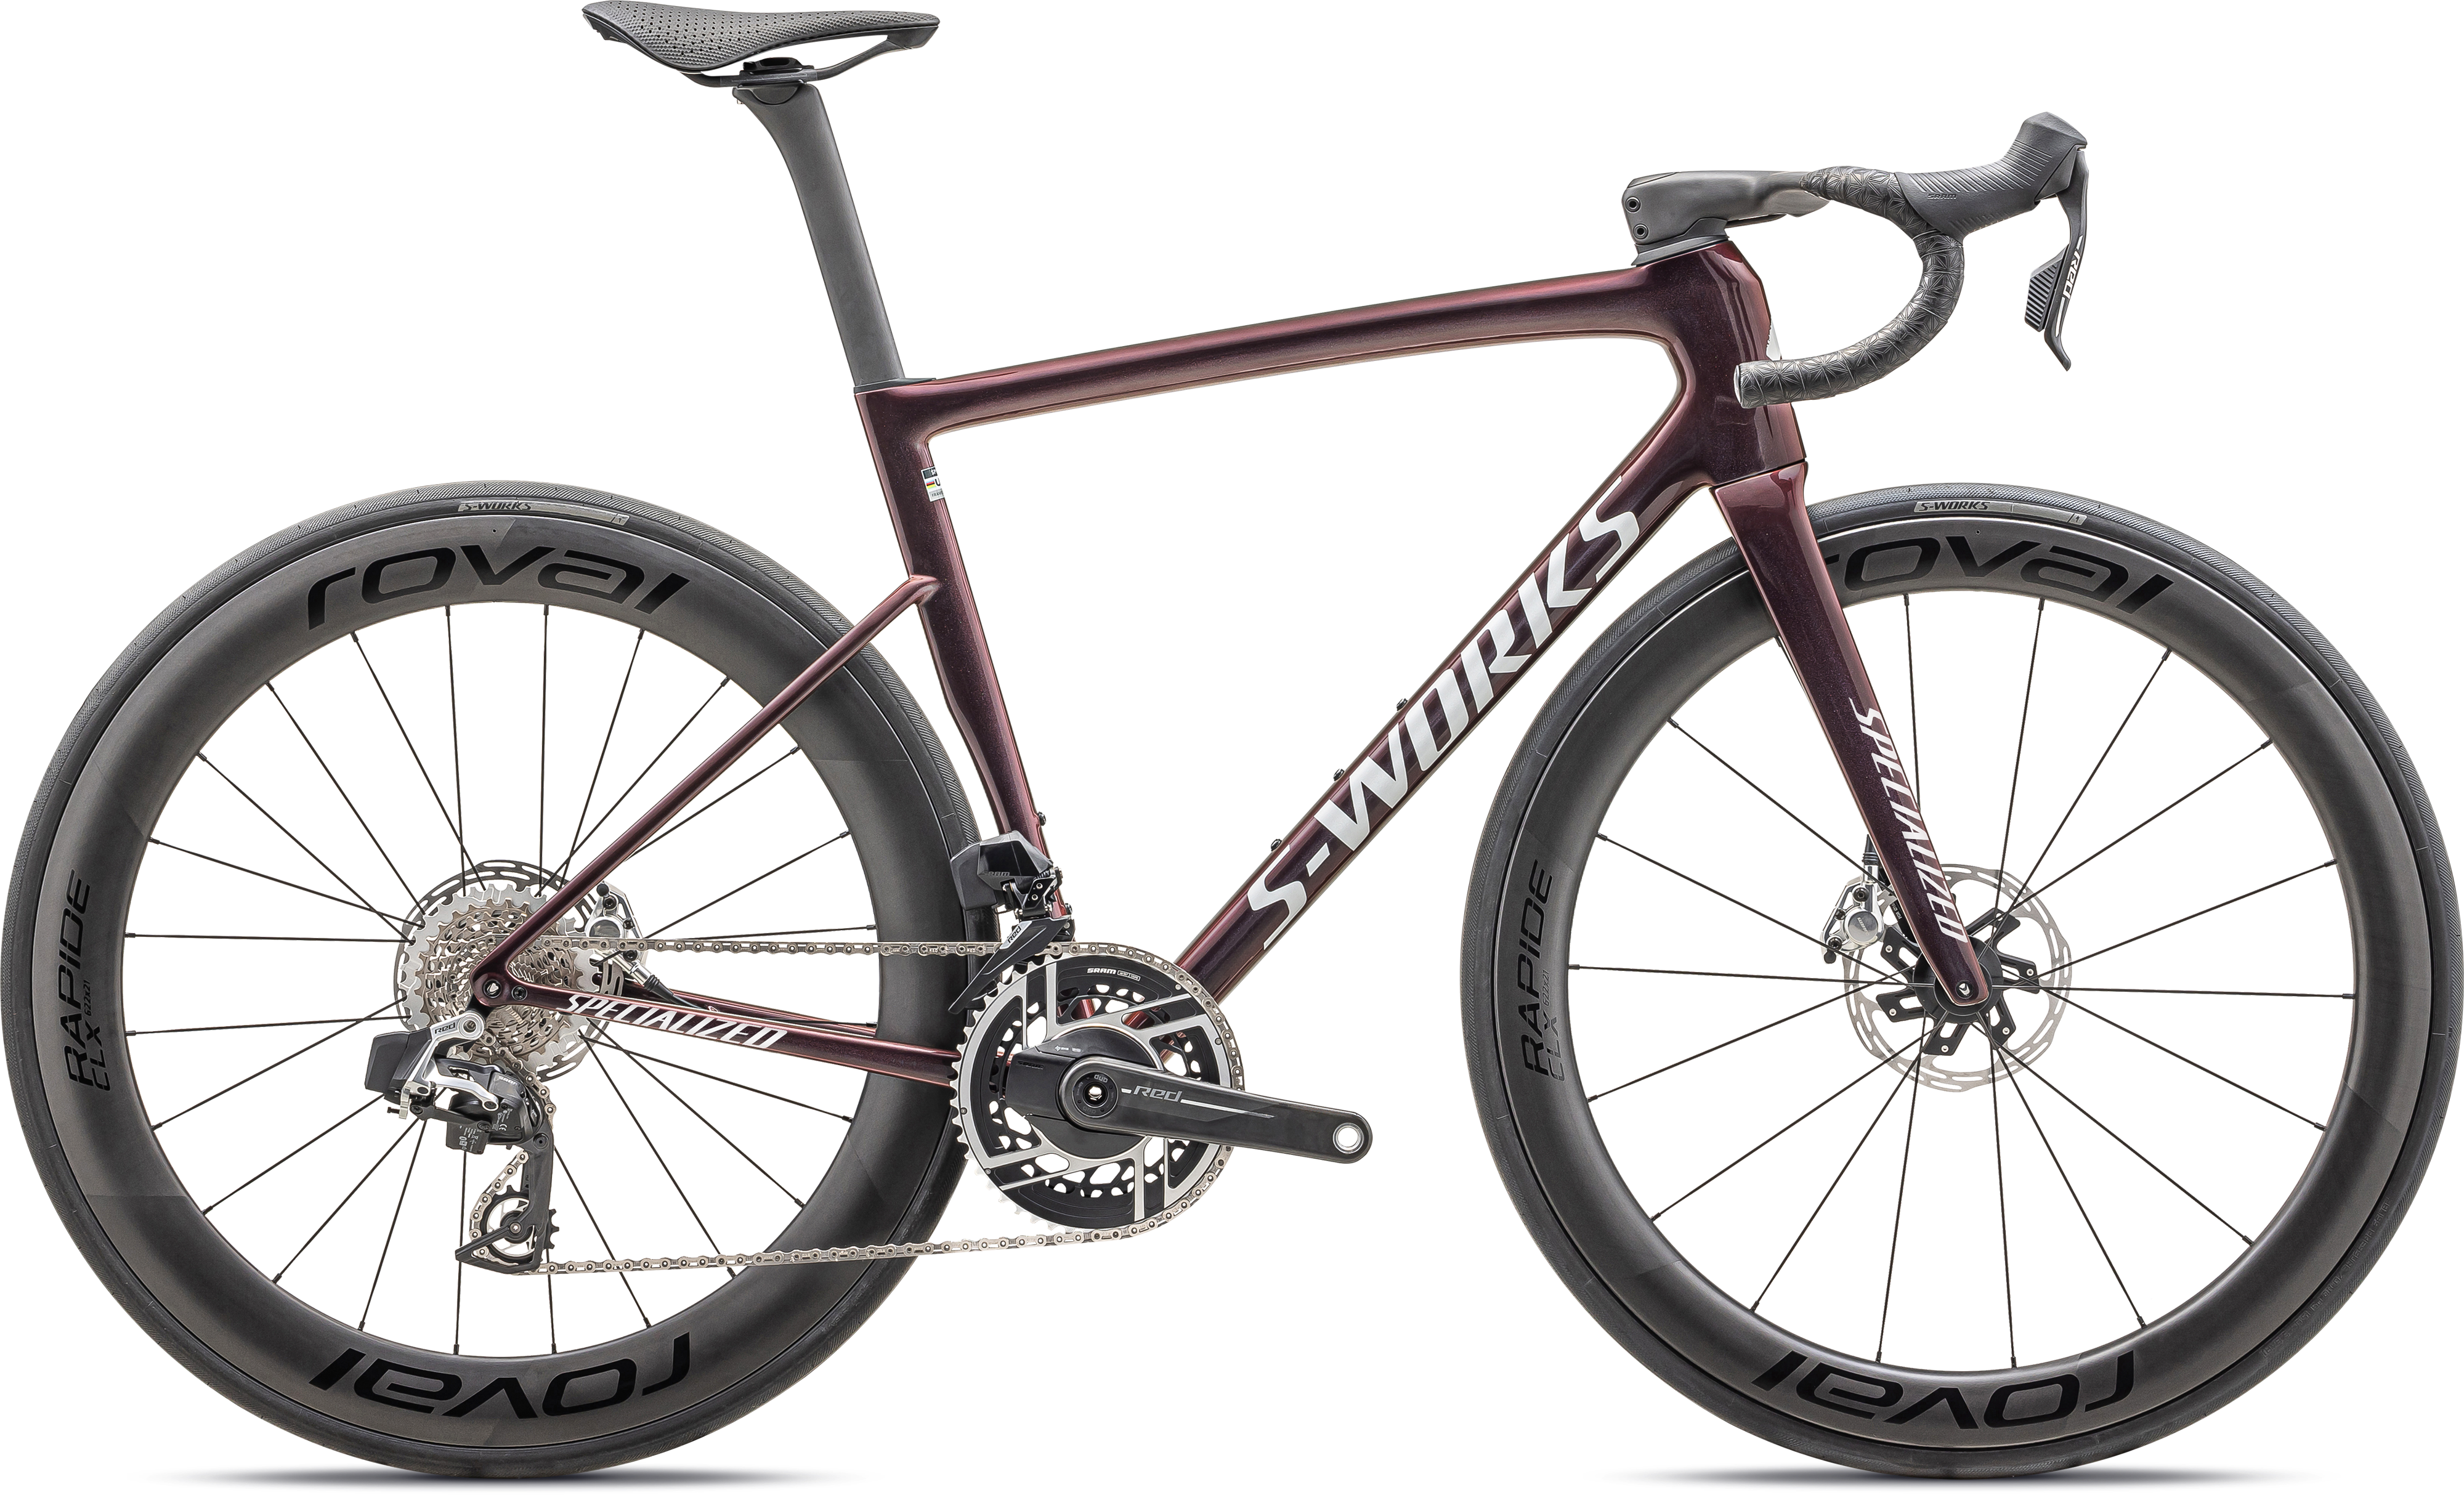 yLy[ΏہzS-WORKS TARMAC SL8 - SRAM RED AXS